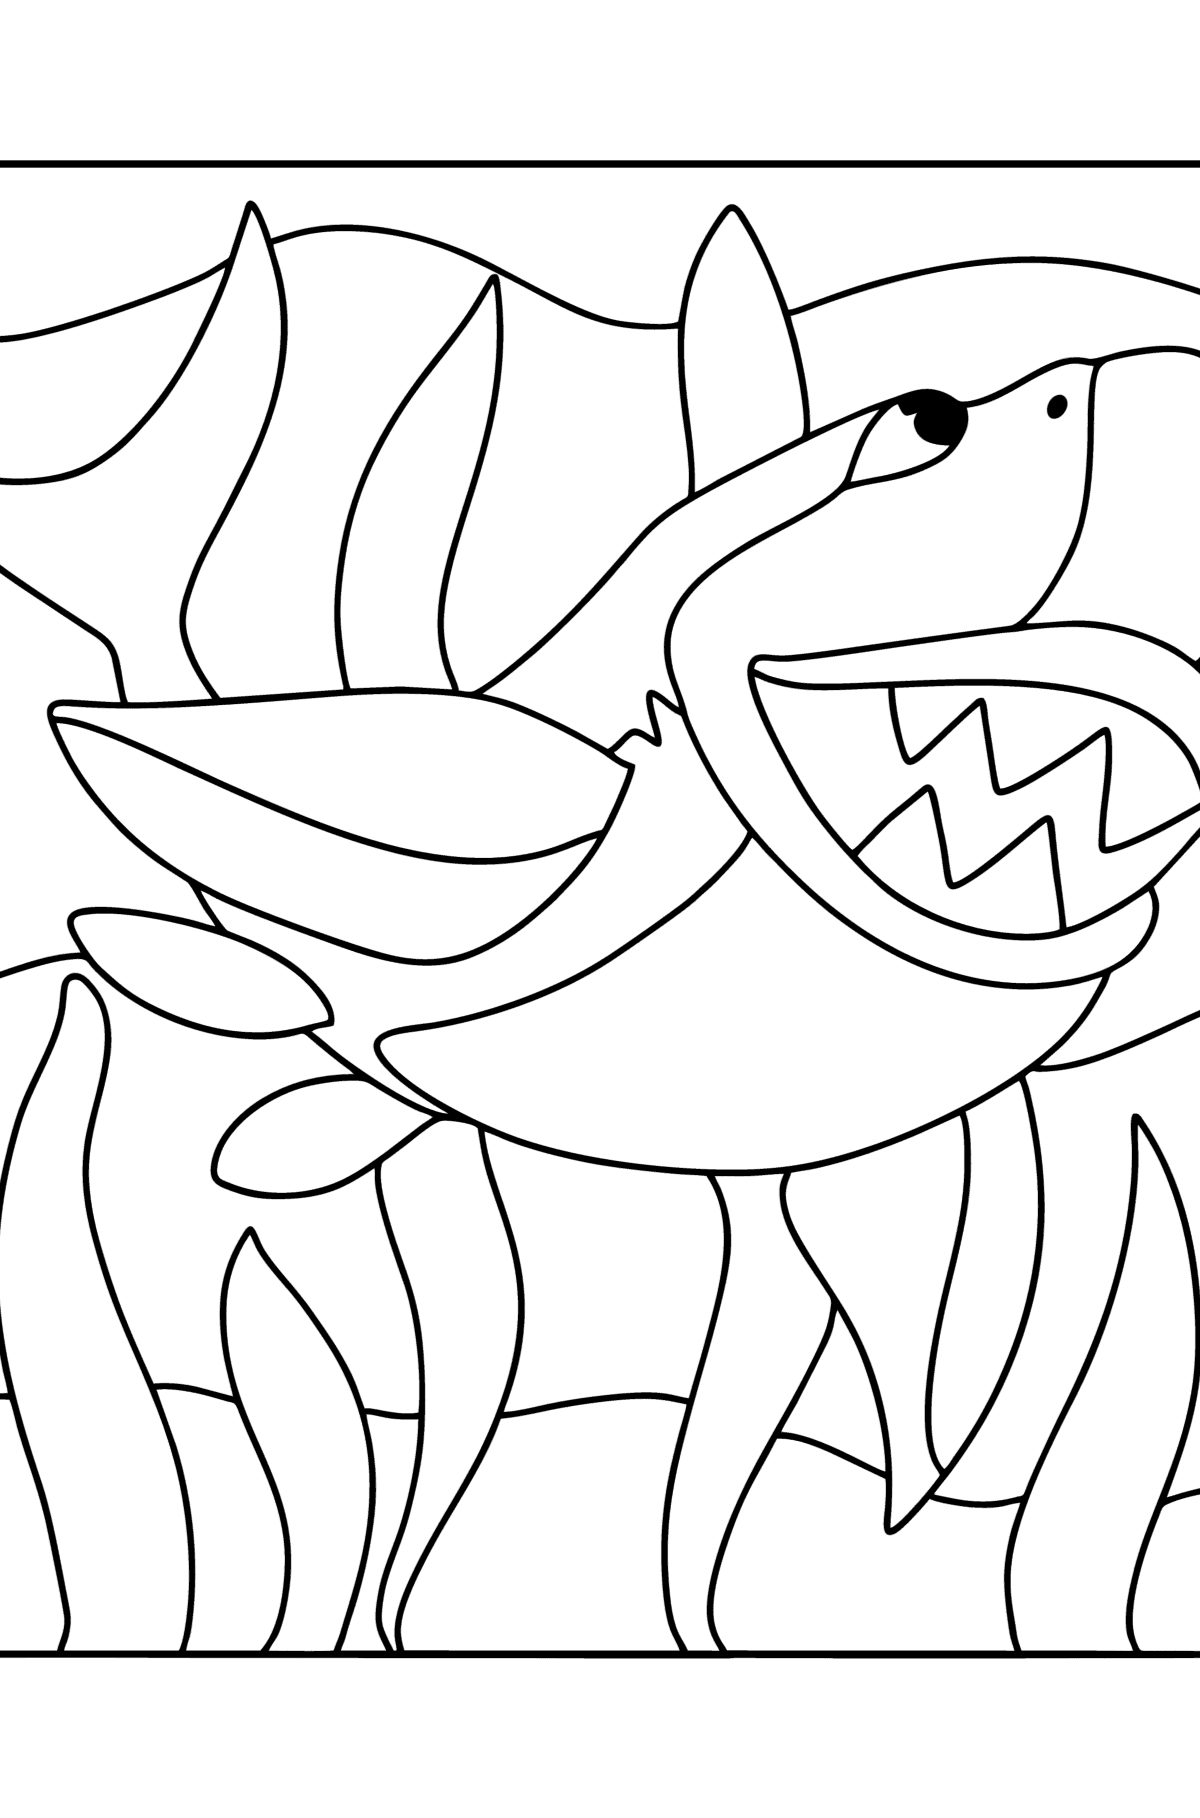 Shark coloring page - Coloring Pages for Kids